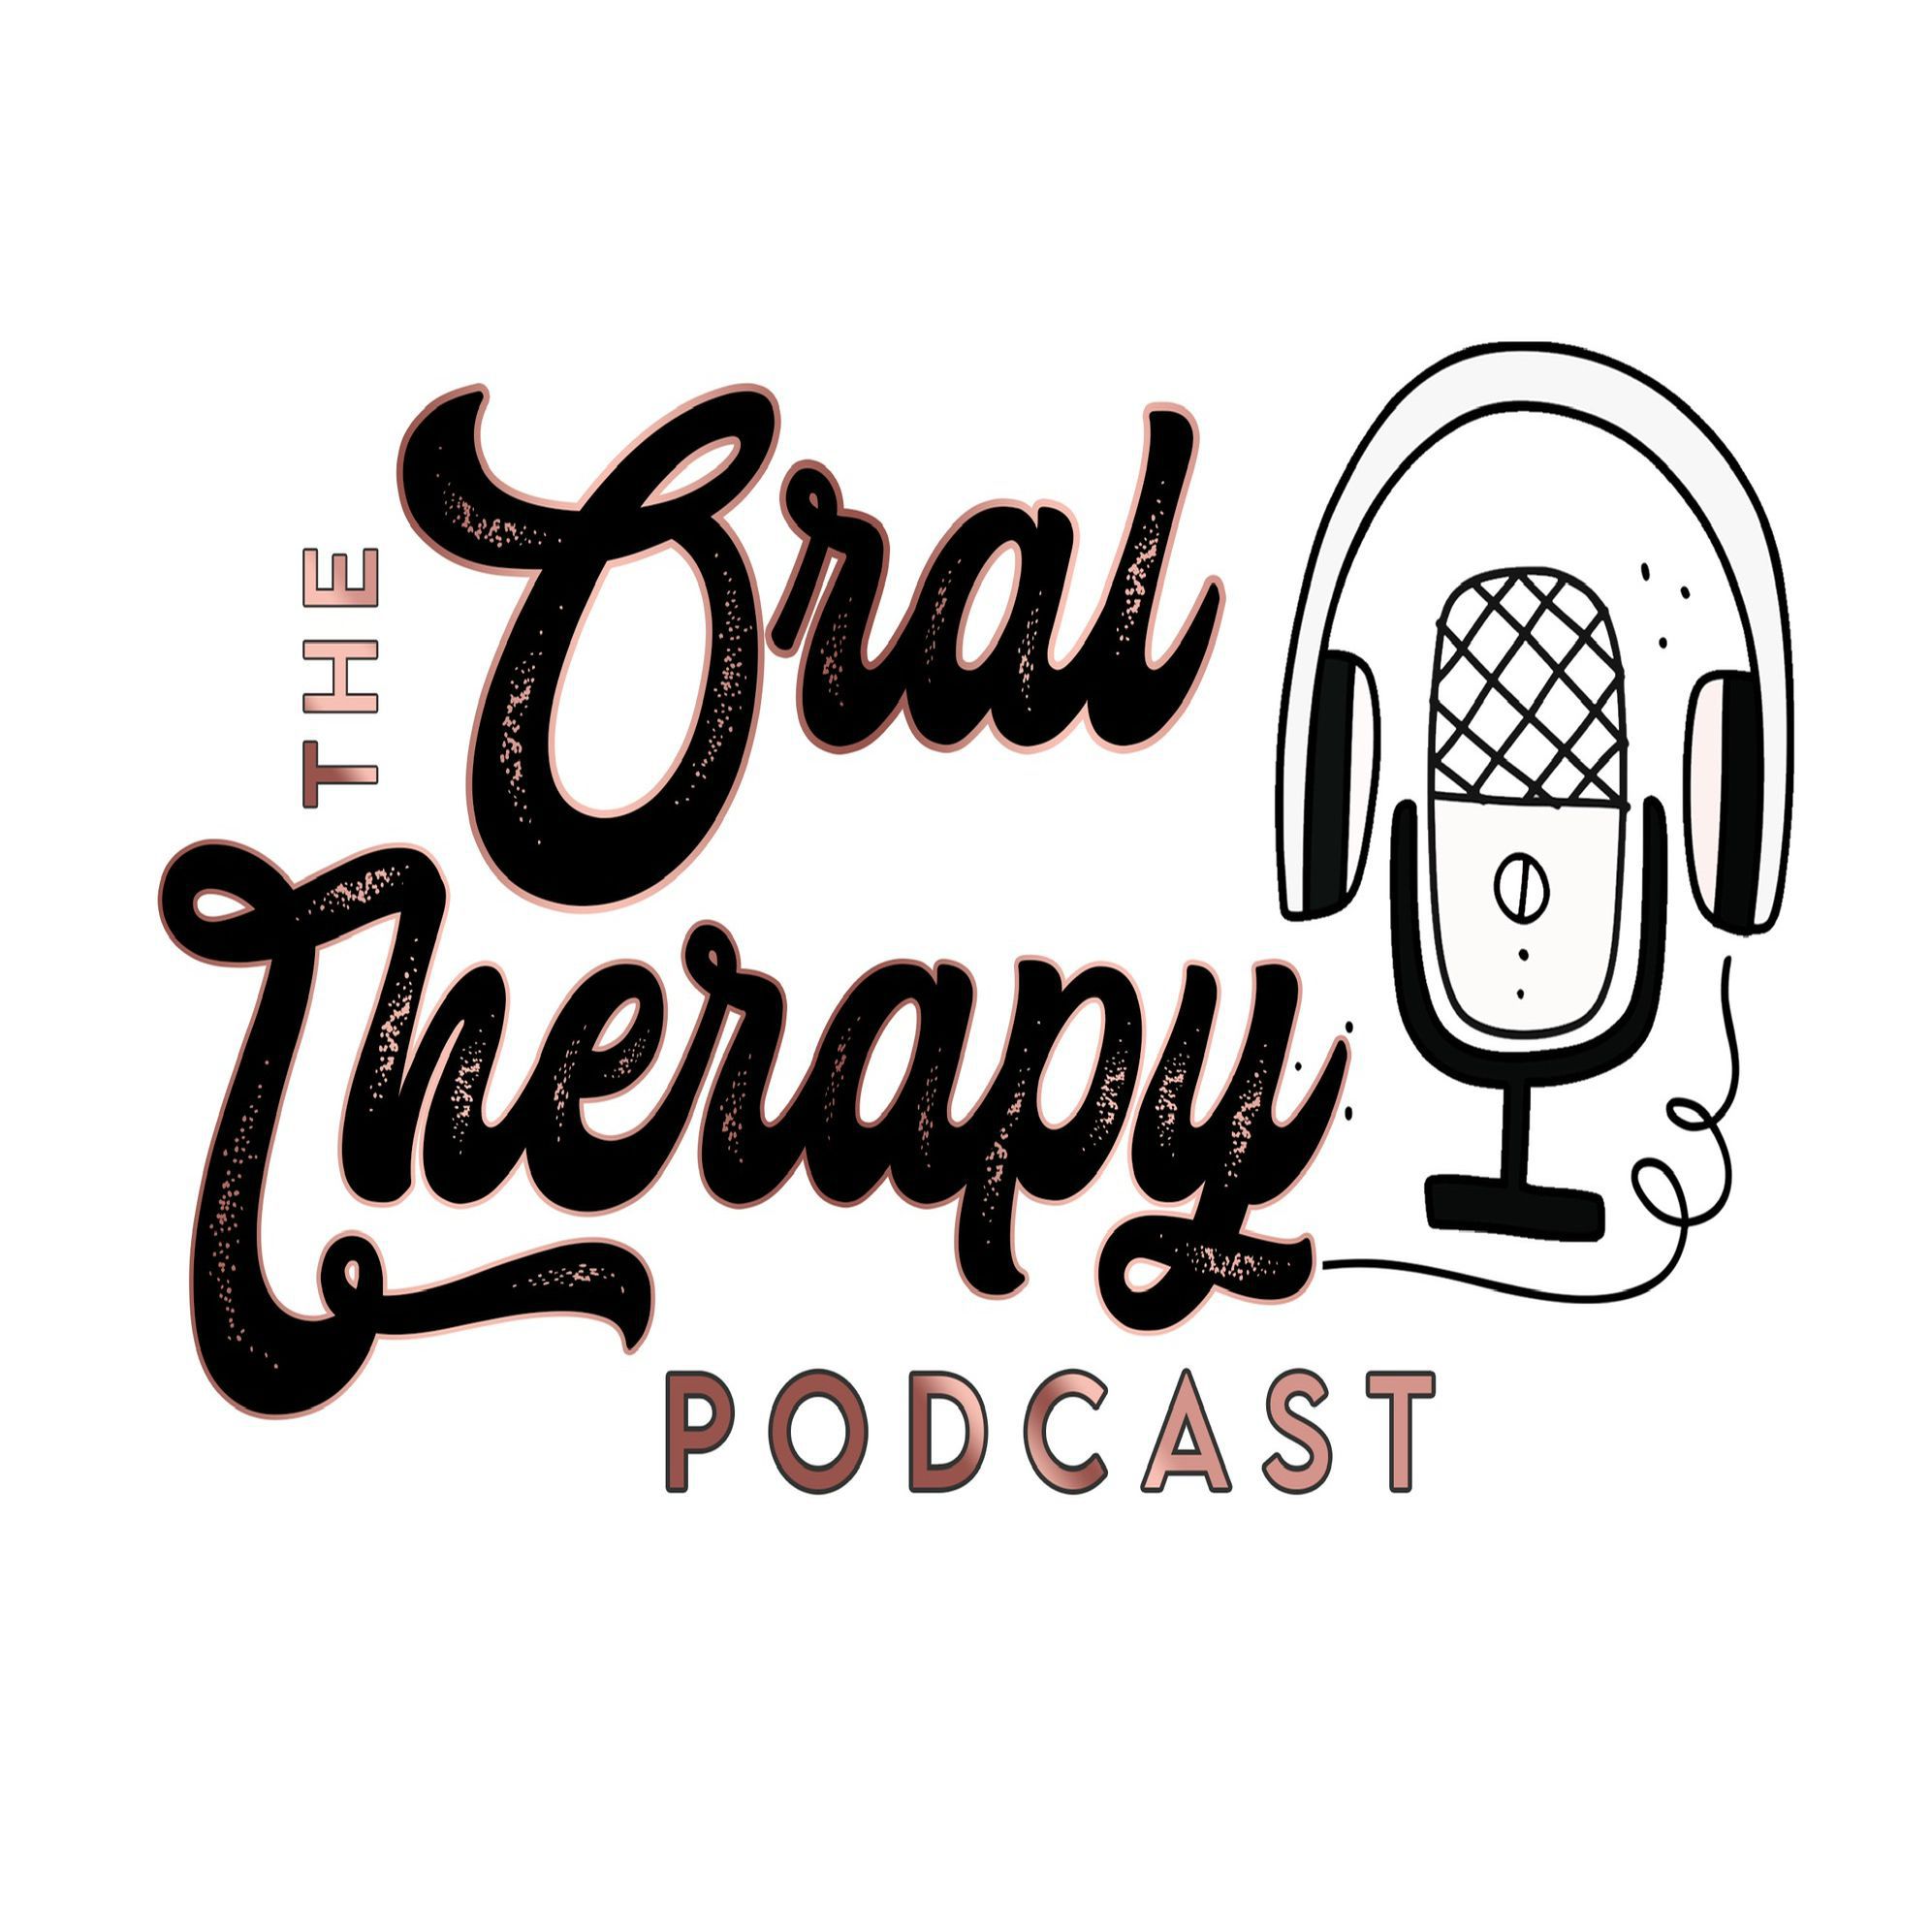 The Oral Therapy Podcast